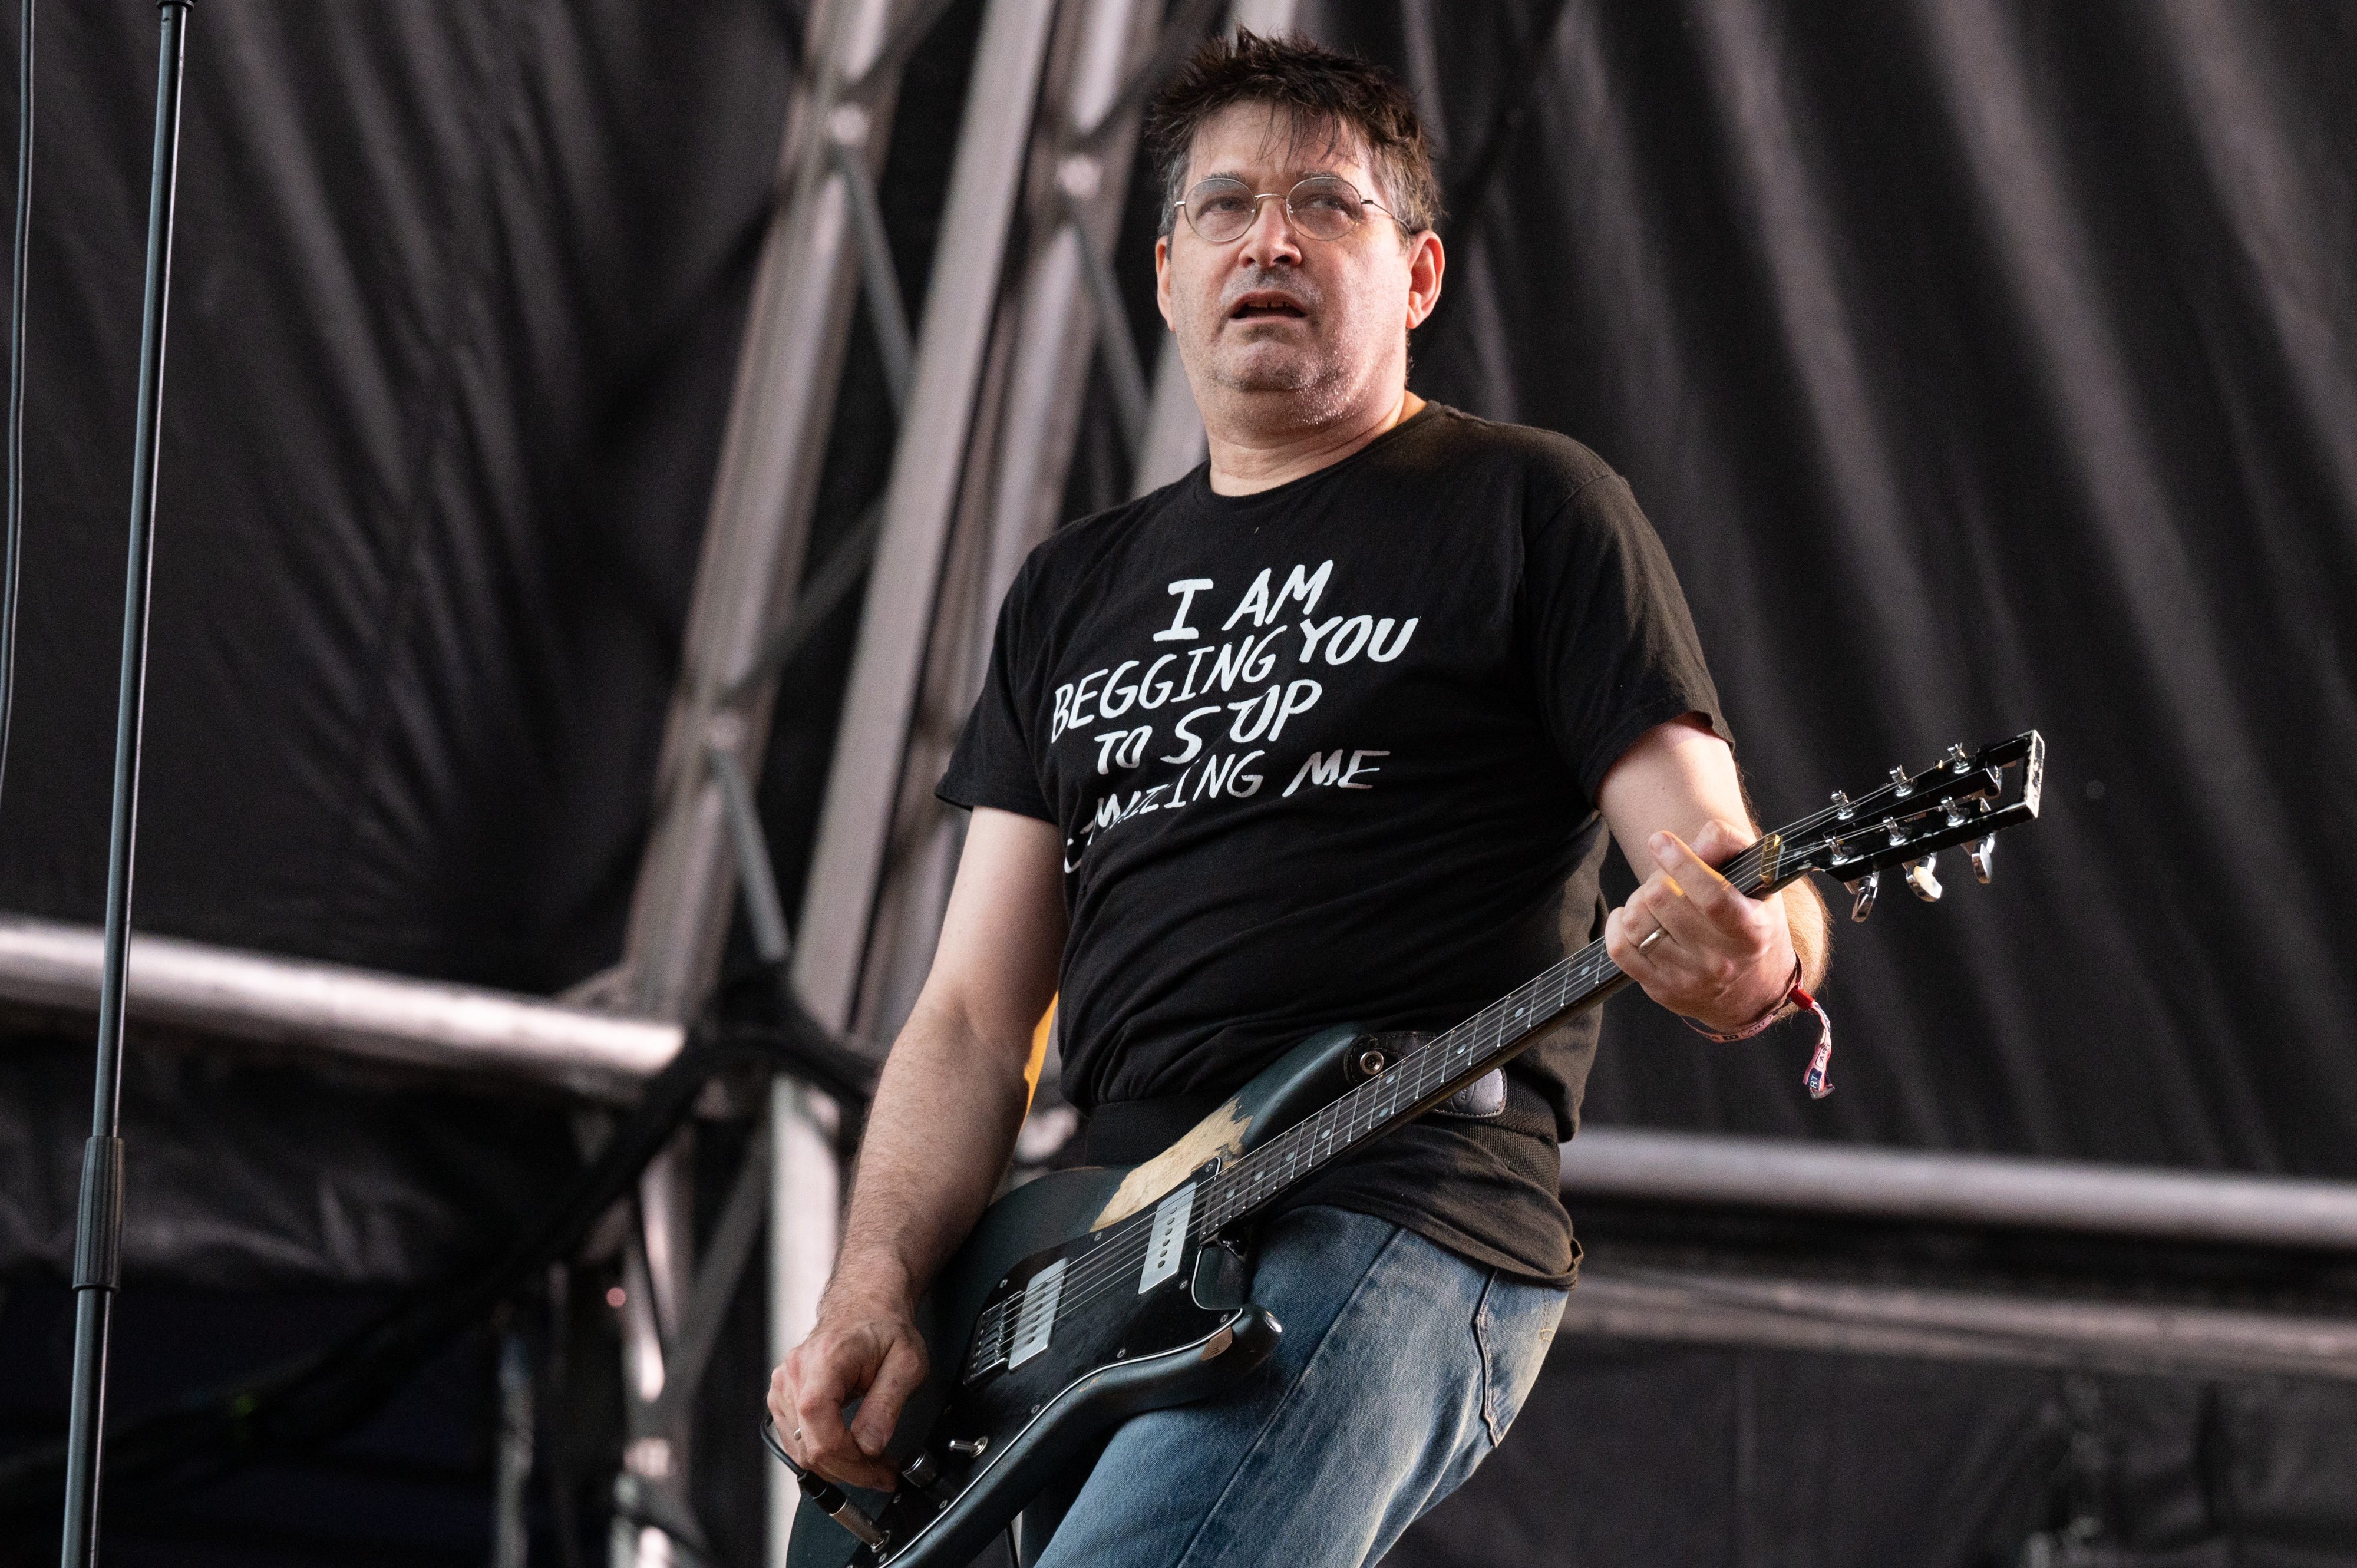 Steve Albini of Shellac performs during Primavera Sound 2022 in Barcelona, Spain, on June 3, 2022